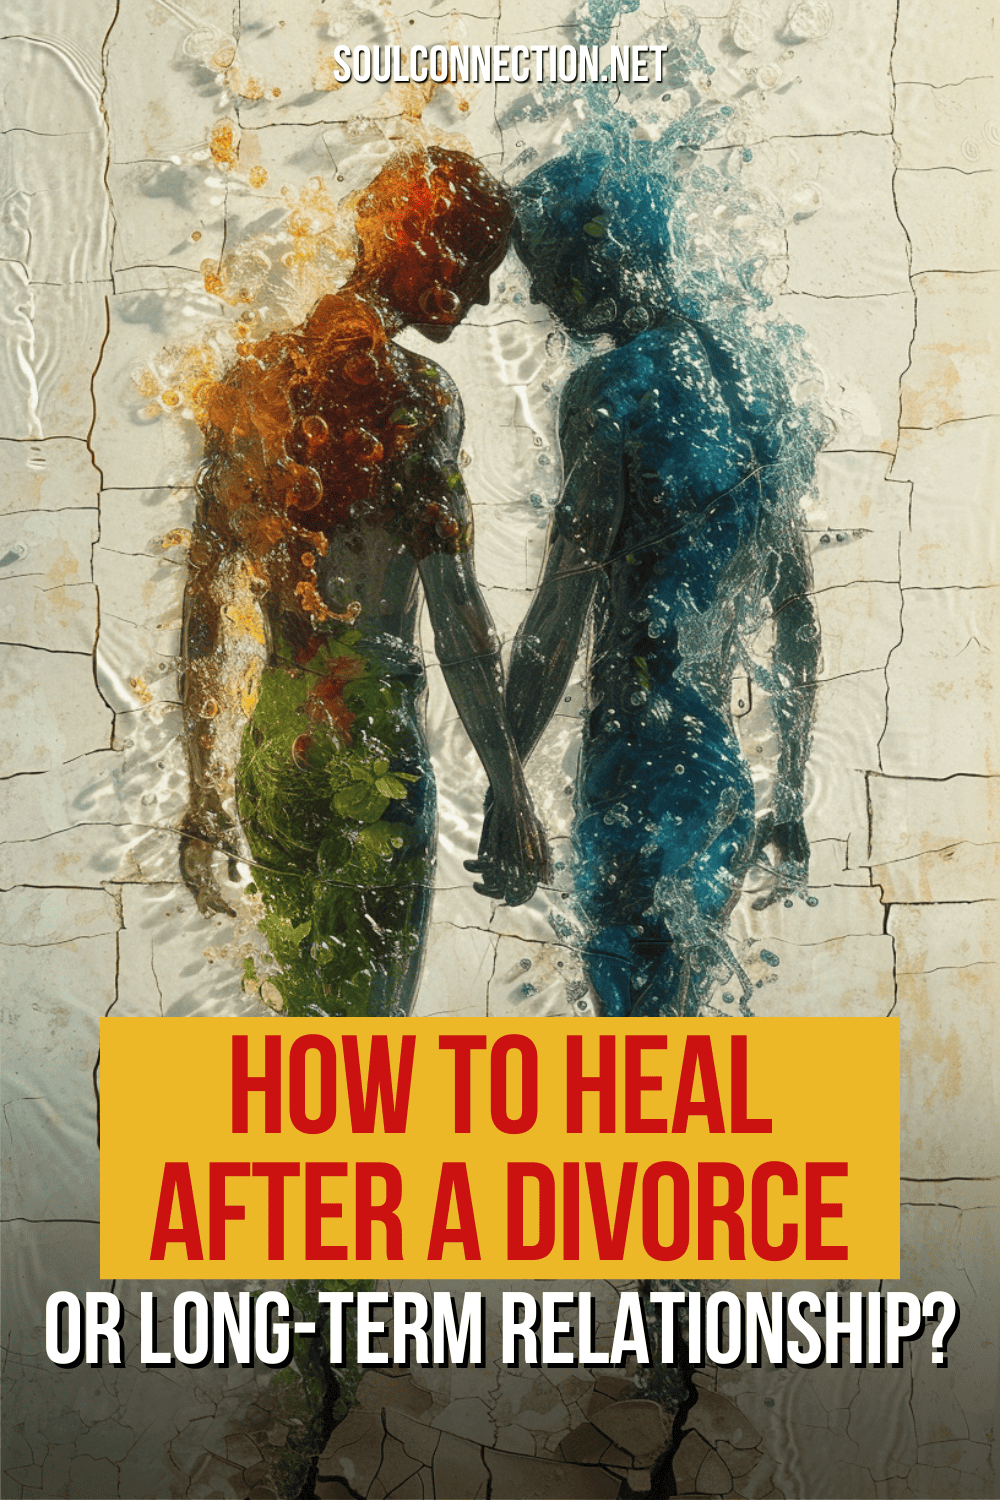 Healing After Divorce: Overcoming Heartbreak and Finding Yourself Again.